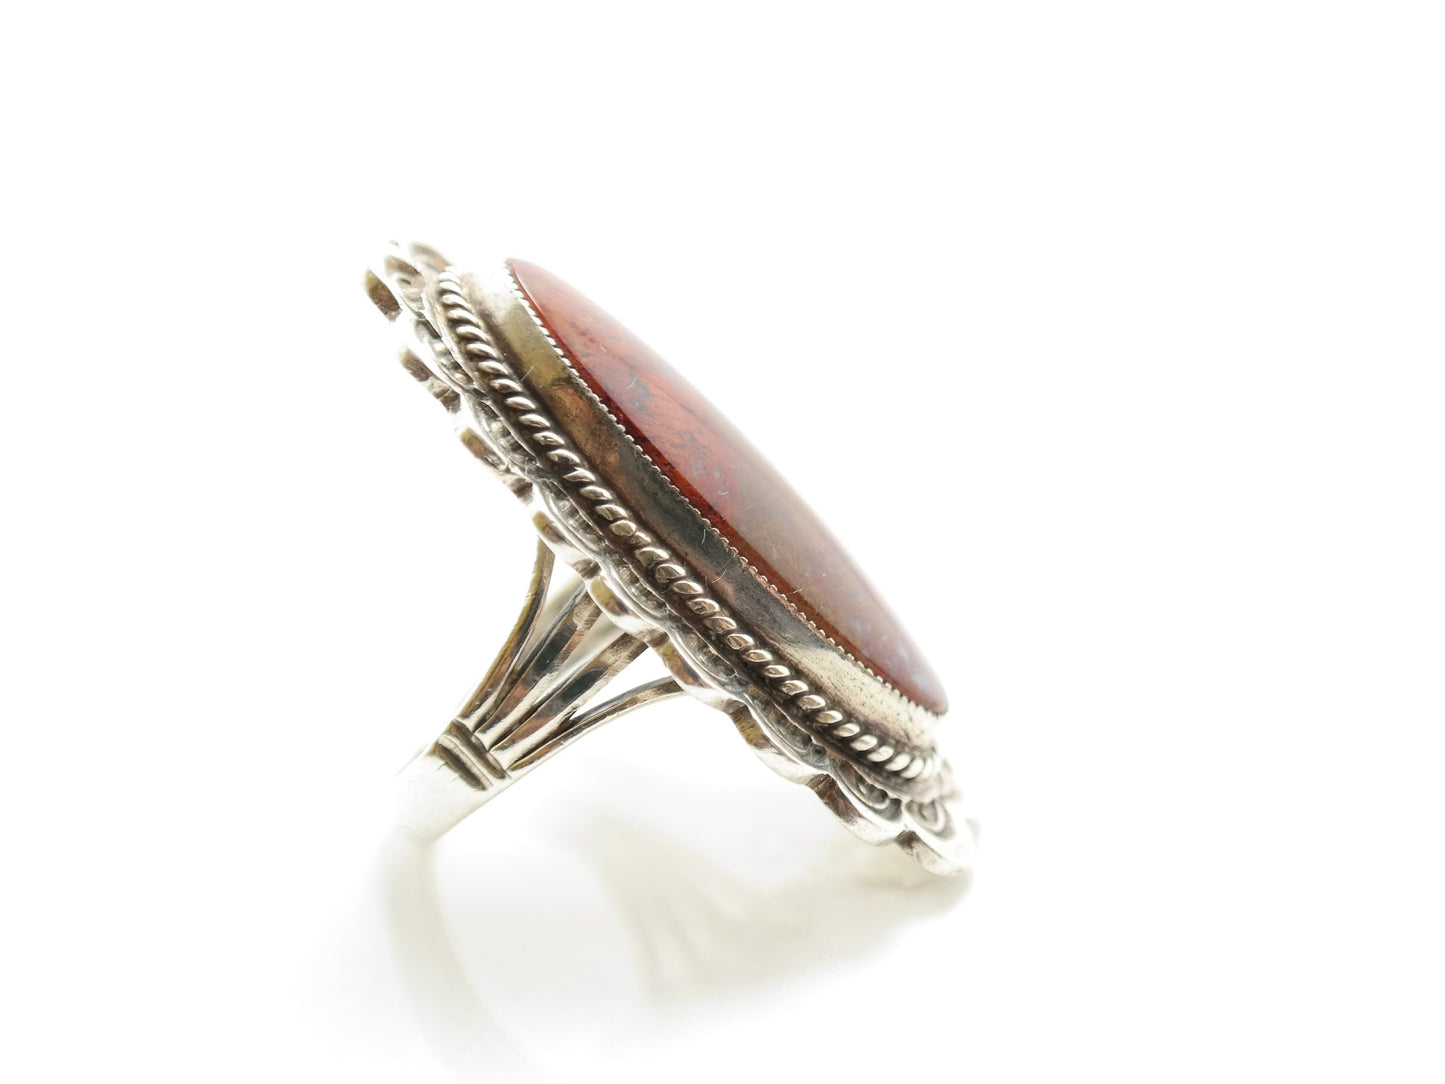 Vintage Native American Agate Ring Sterling Silver Scallop Size 8 1/4